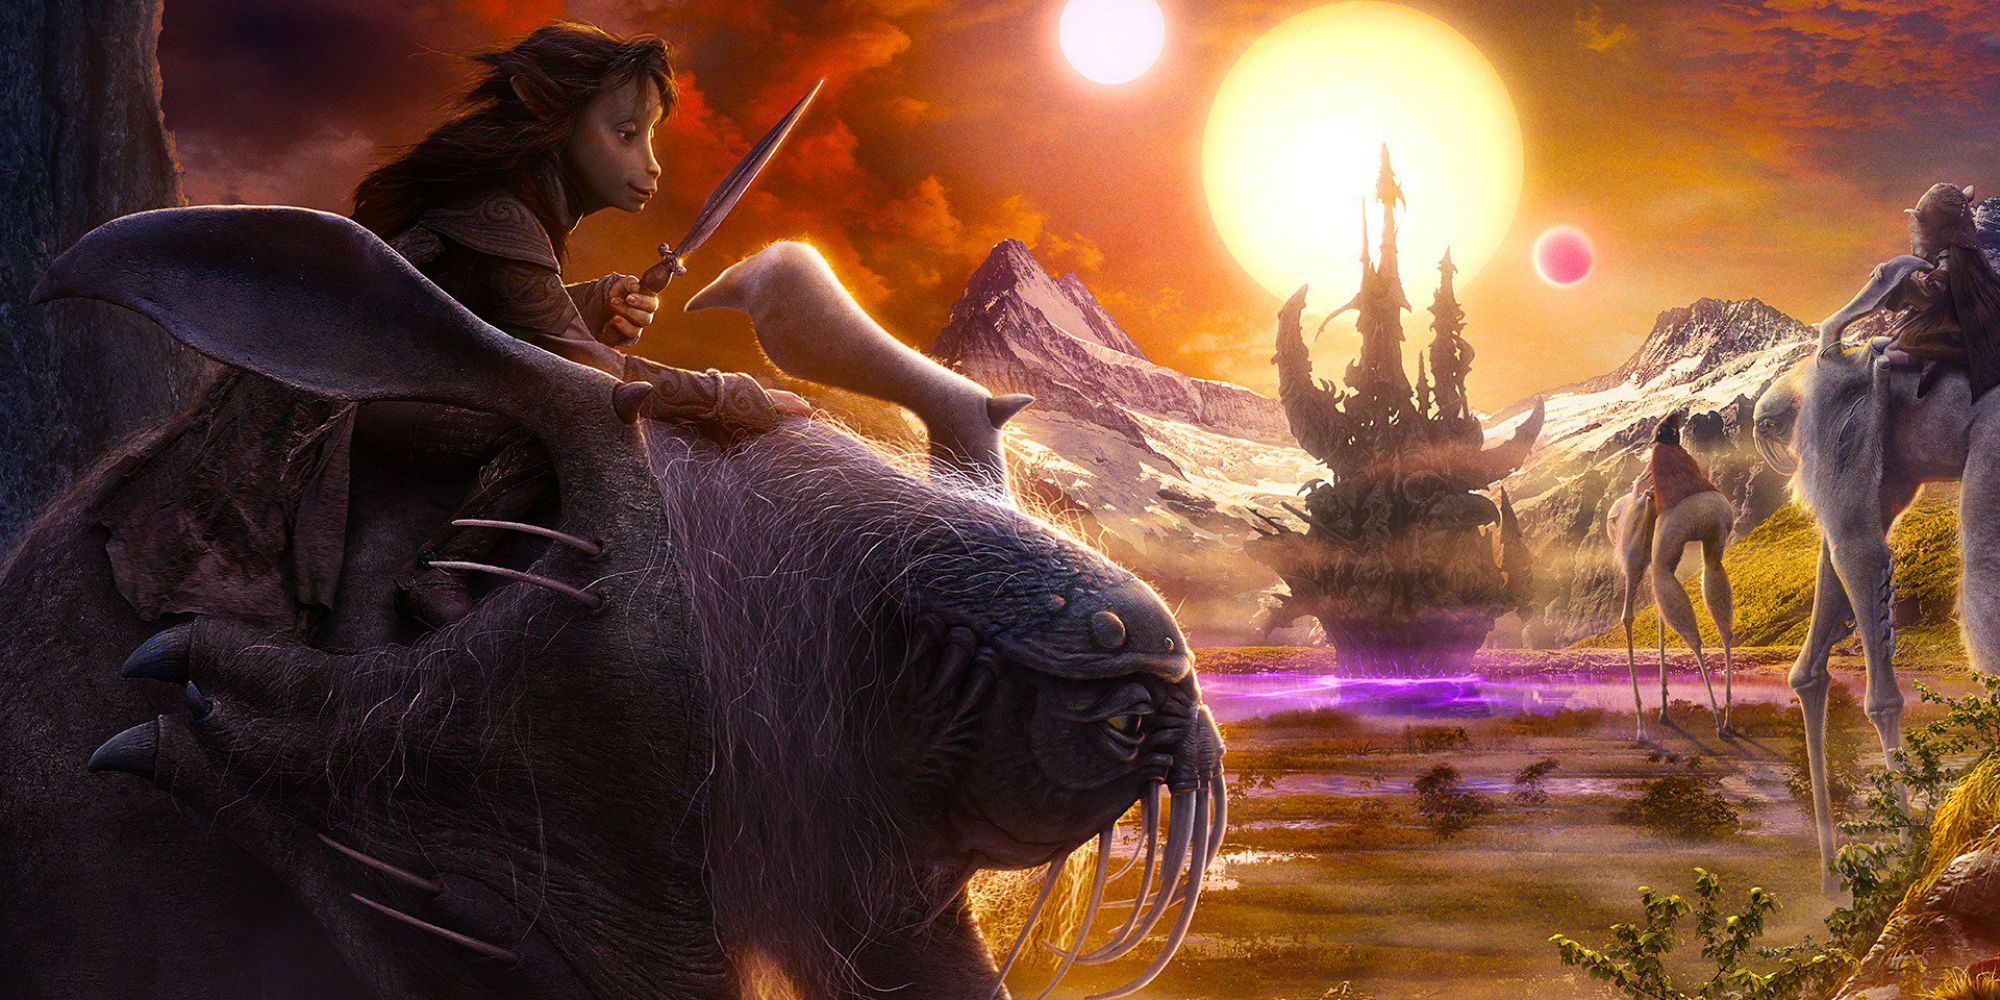 Gelfling riding Landstriders from The Dark Crystal Age of Resistance